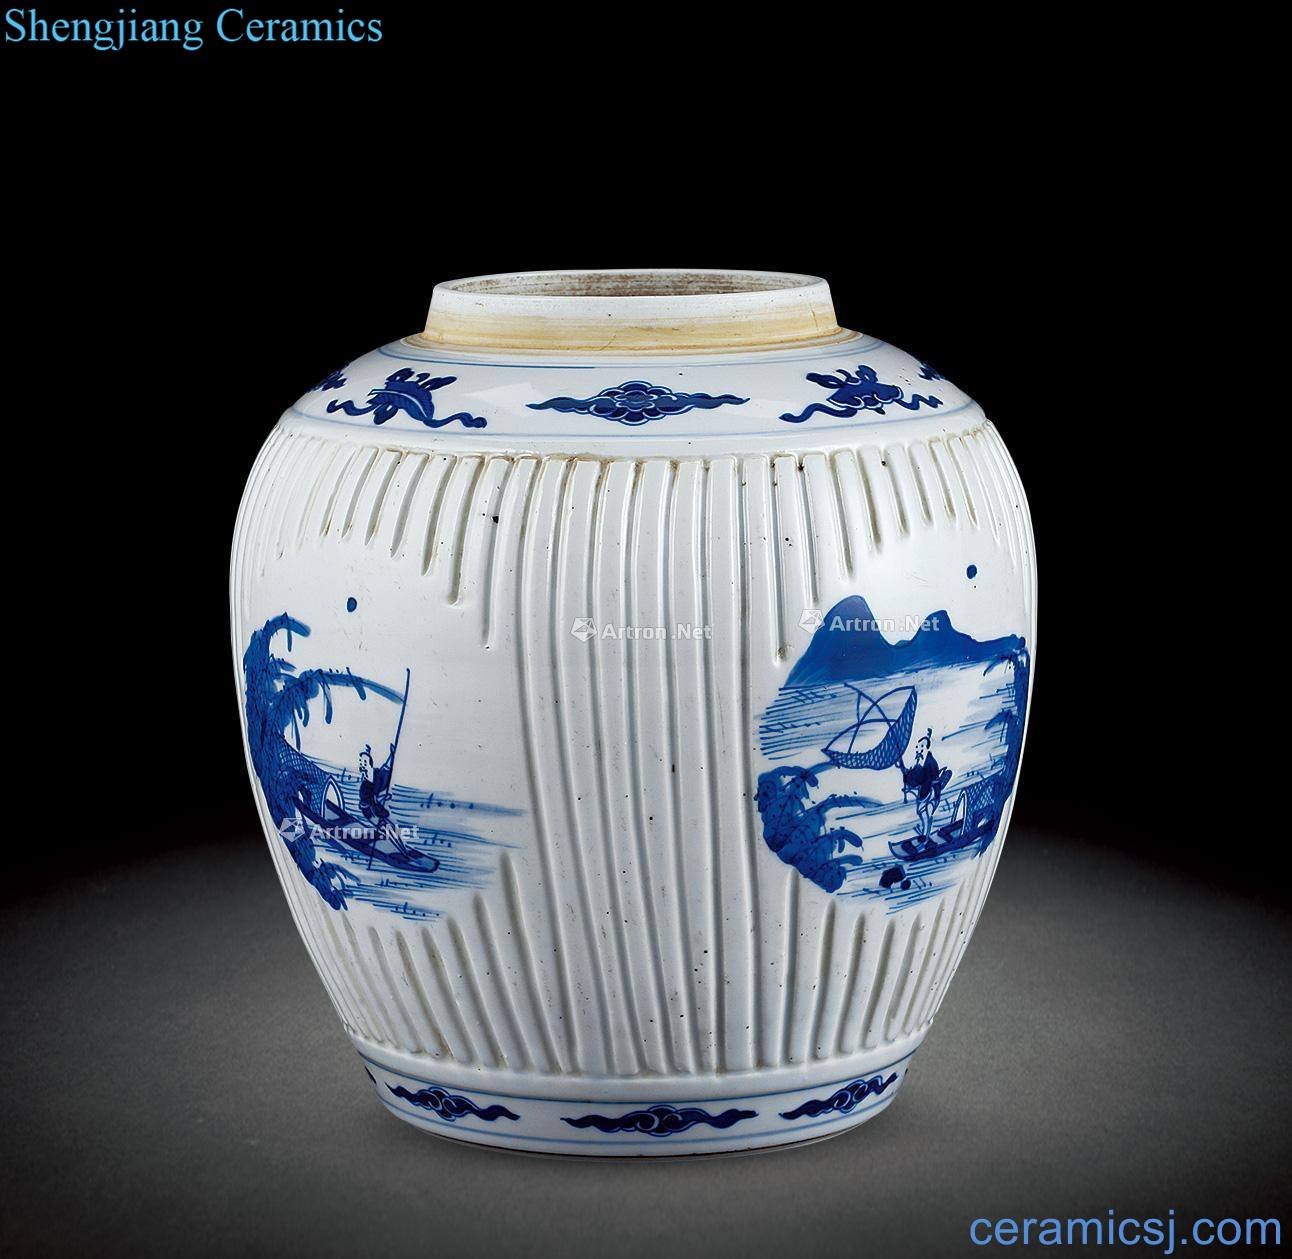 The qing emperor kangxi character lines cans